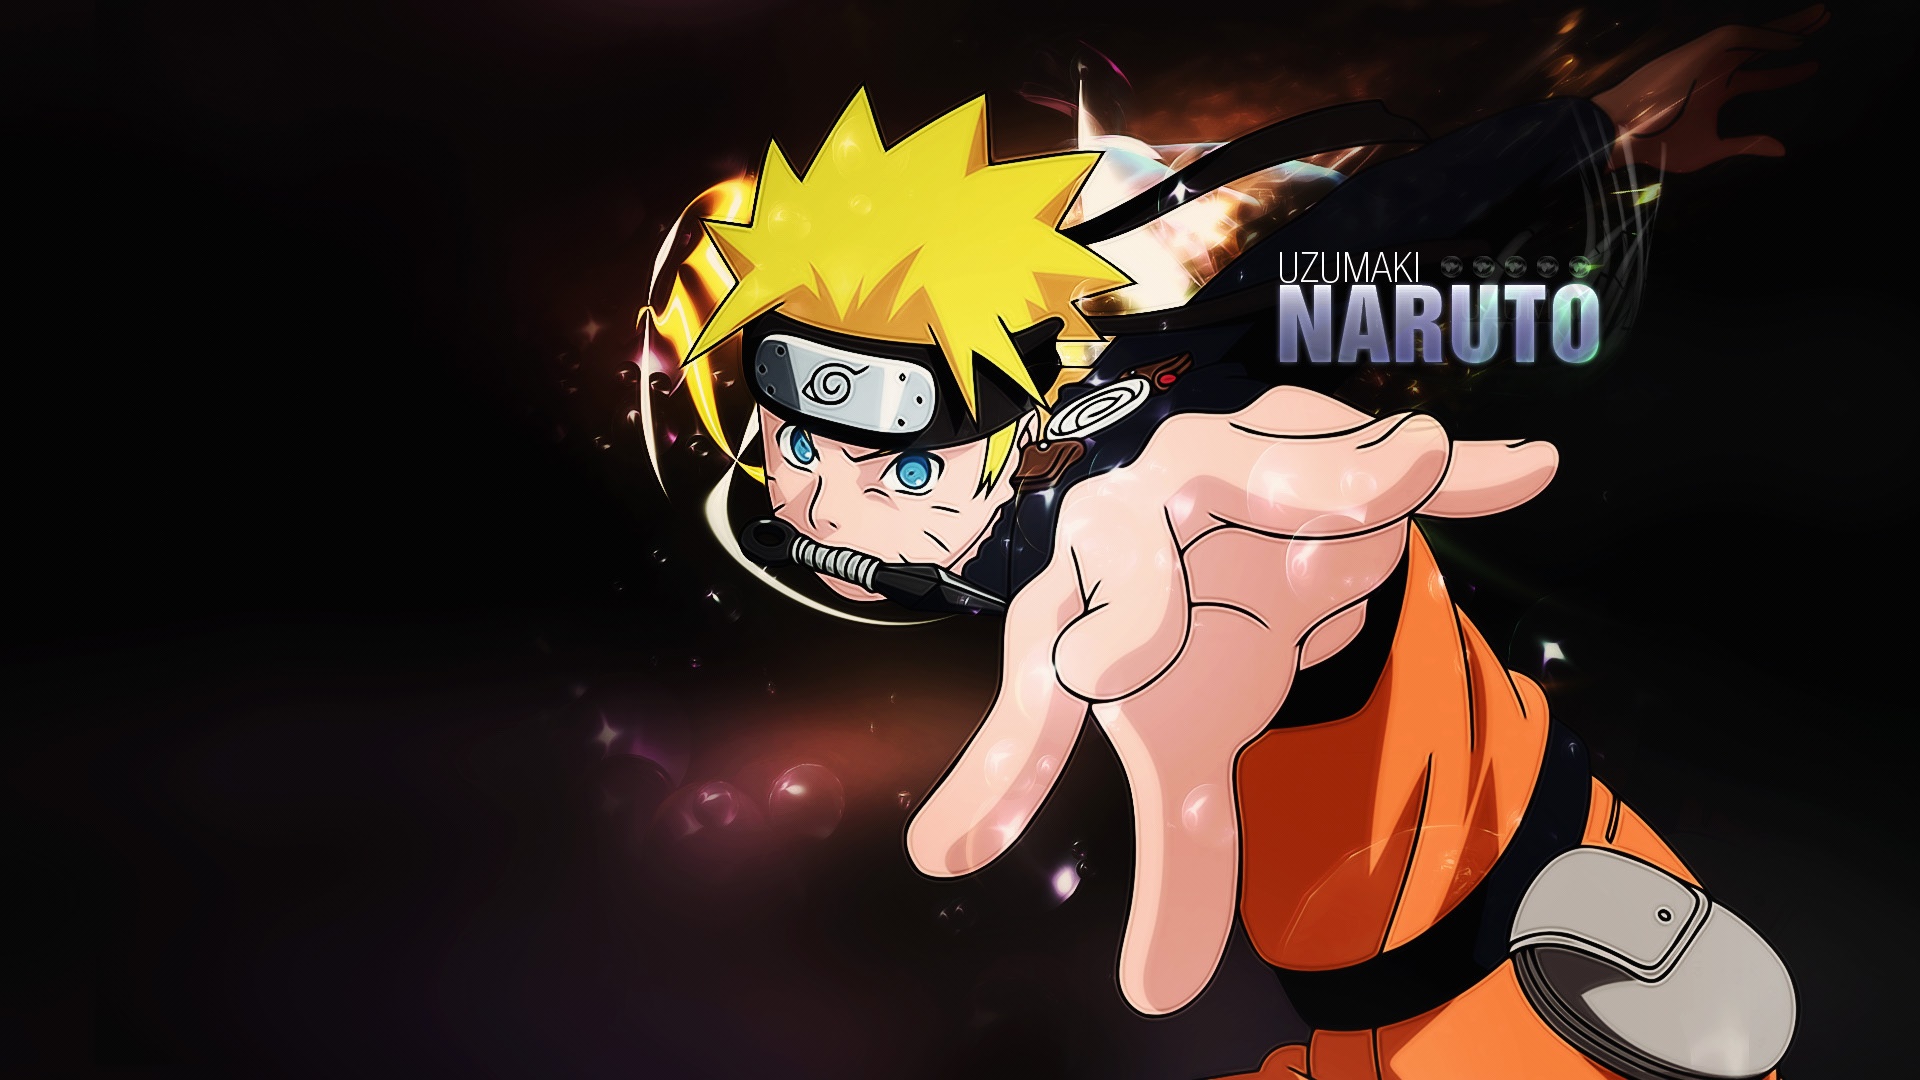 Naruto 4K wallpapers for your desktop